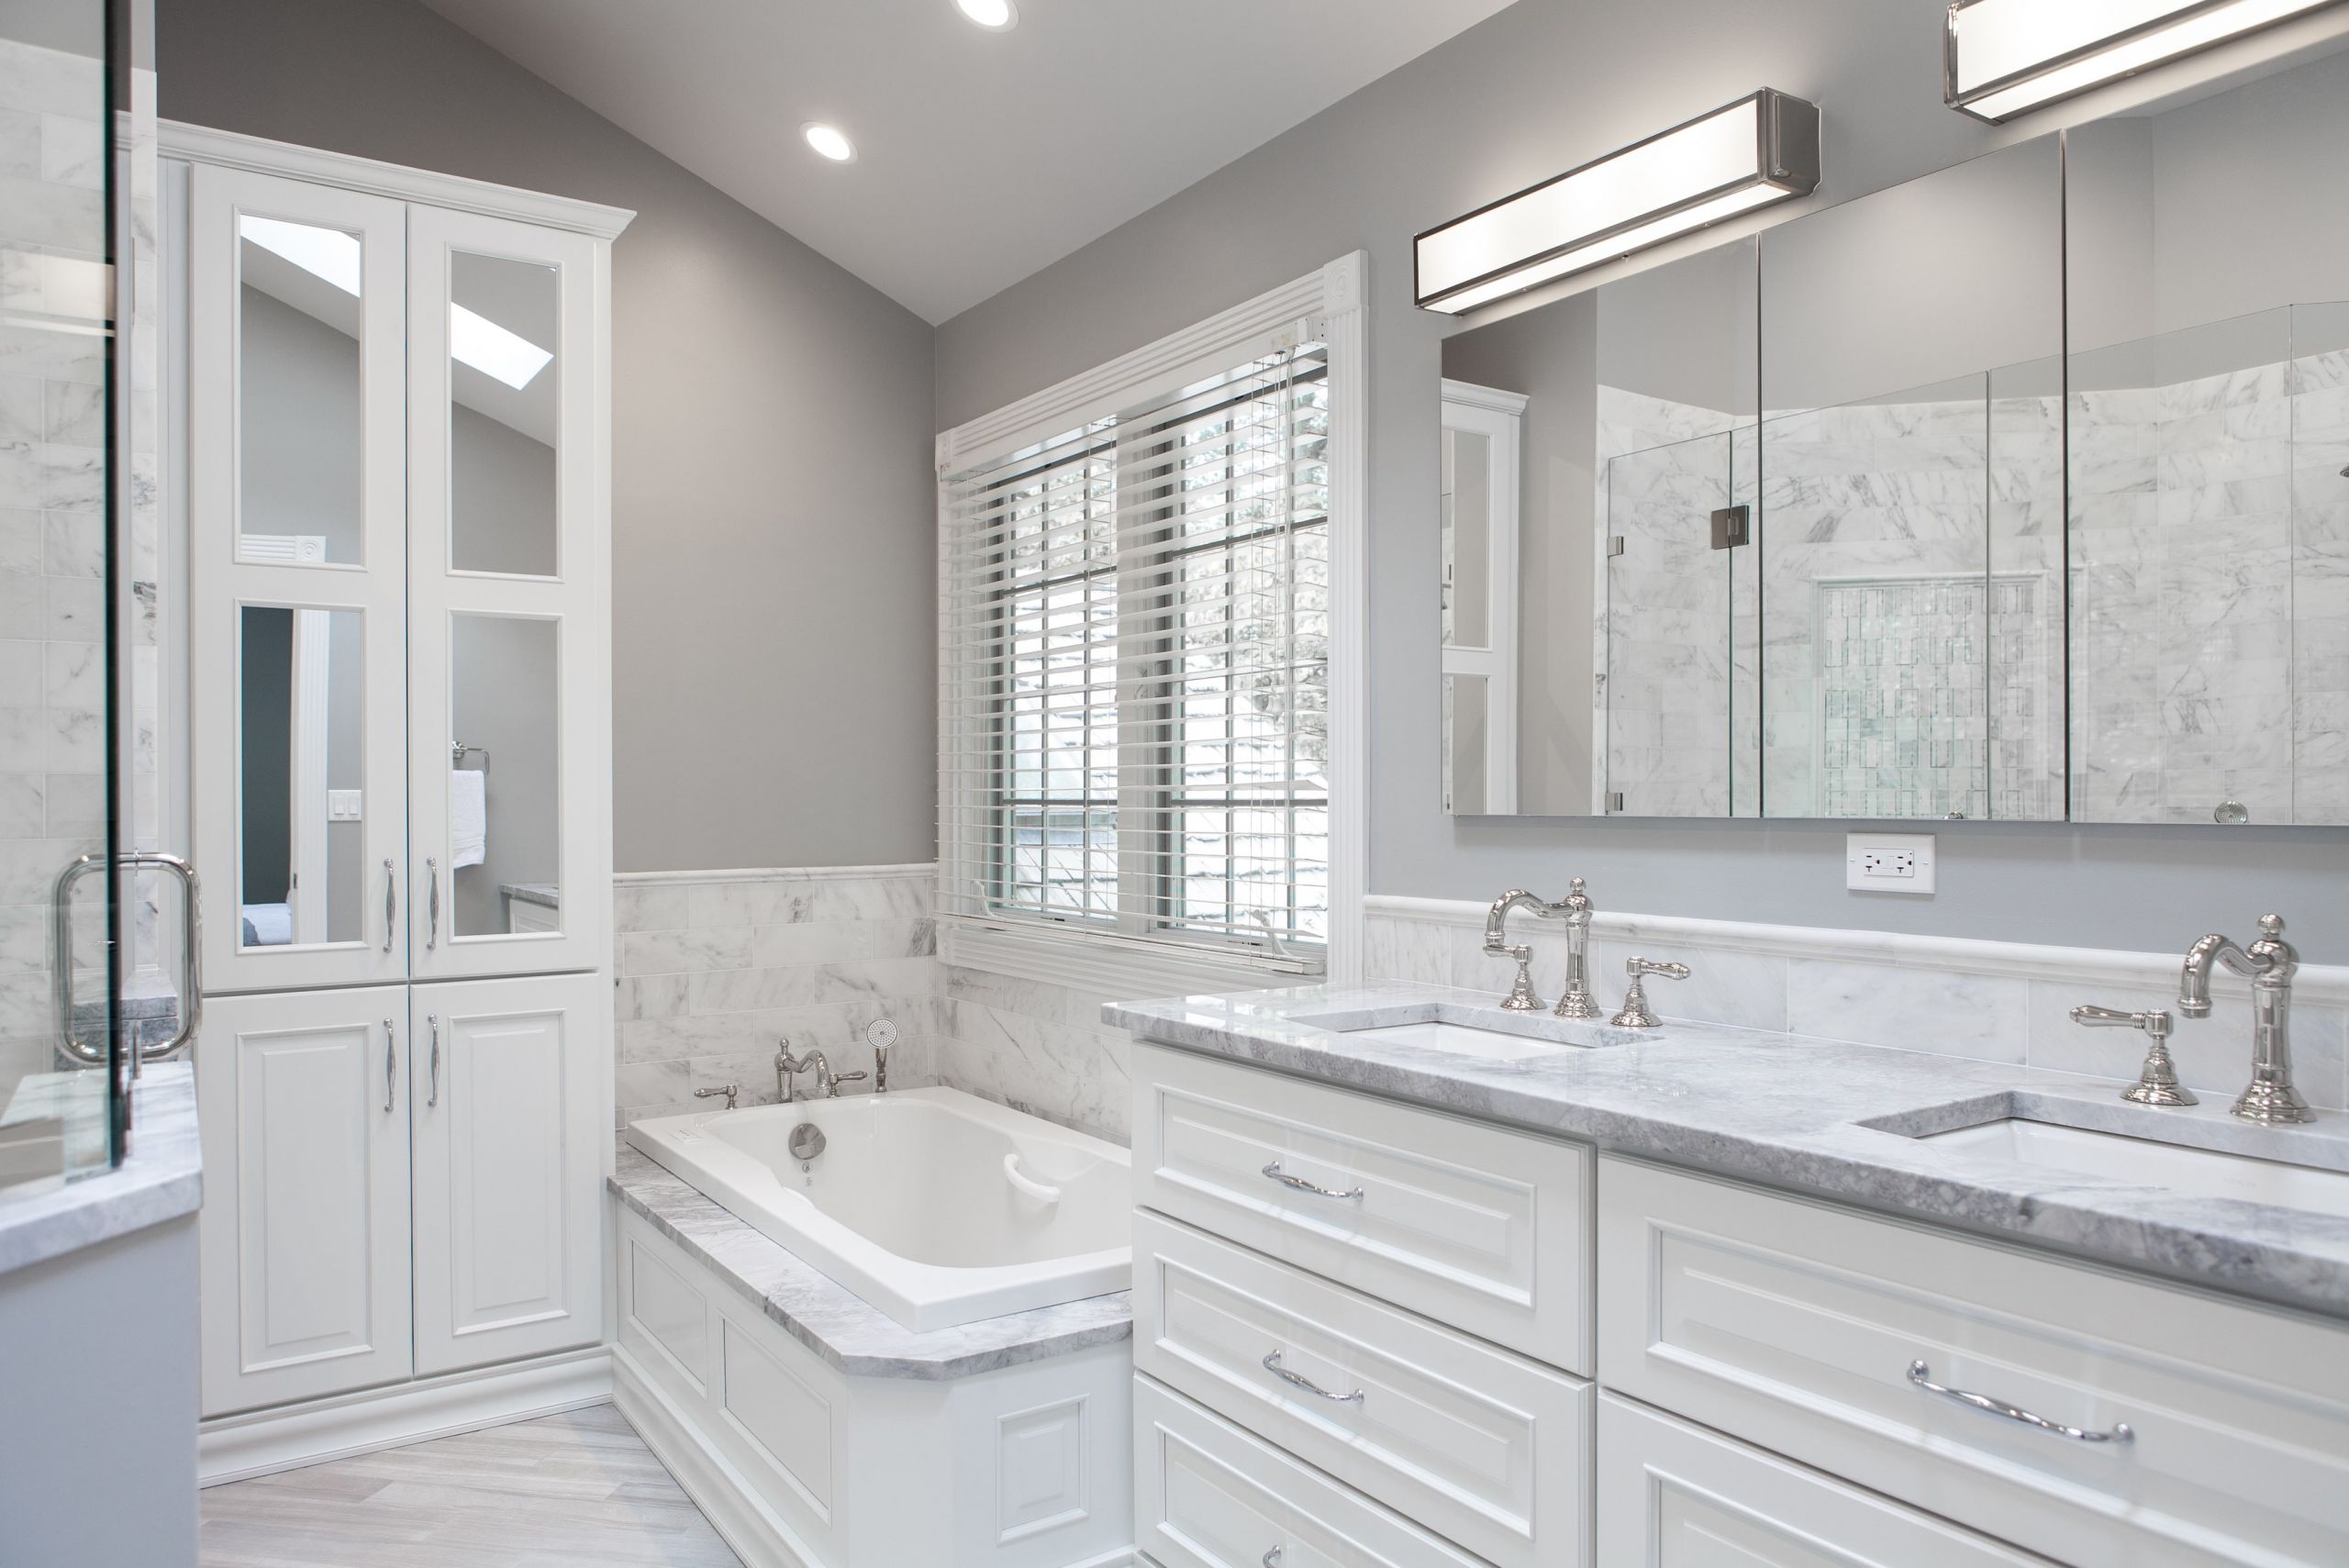 Bathroom Remodel Prices
 How Much Does a Bathroom Remodel Cost in the Chicago Area